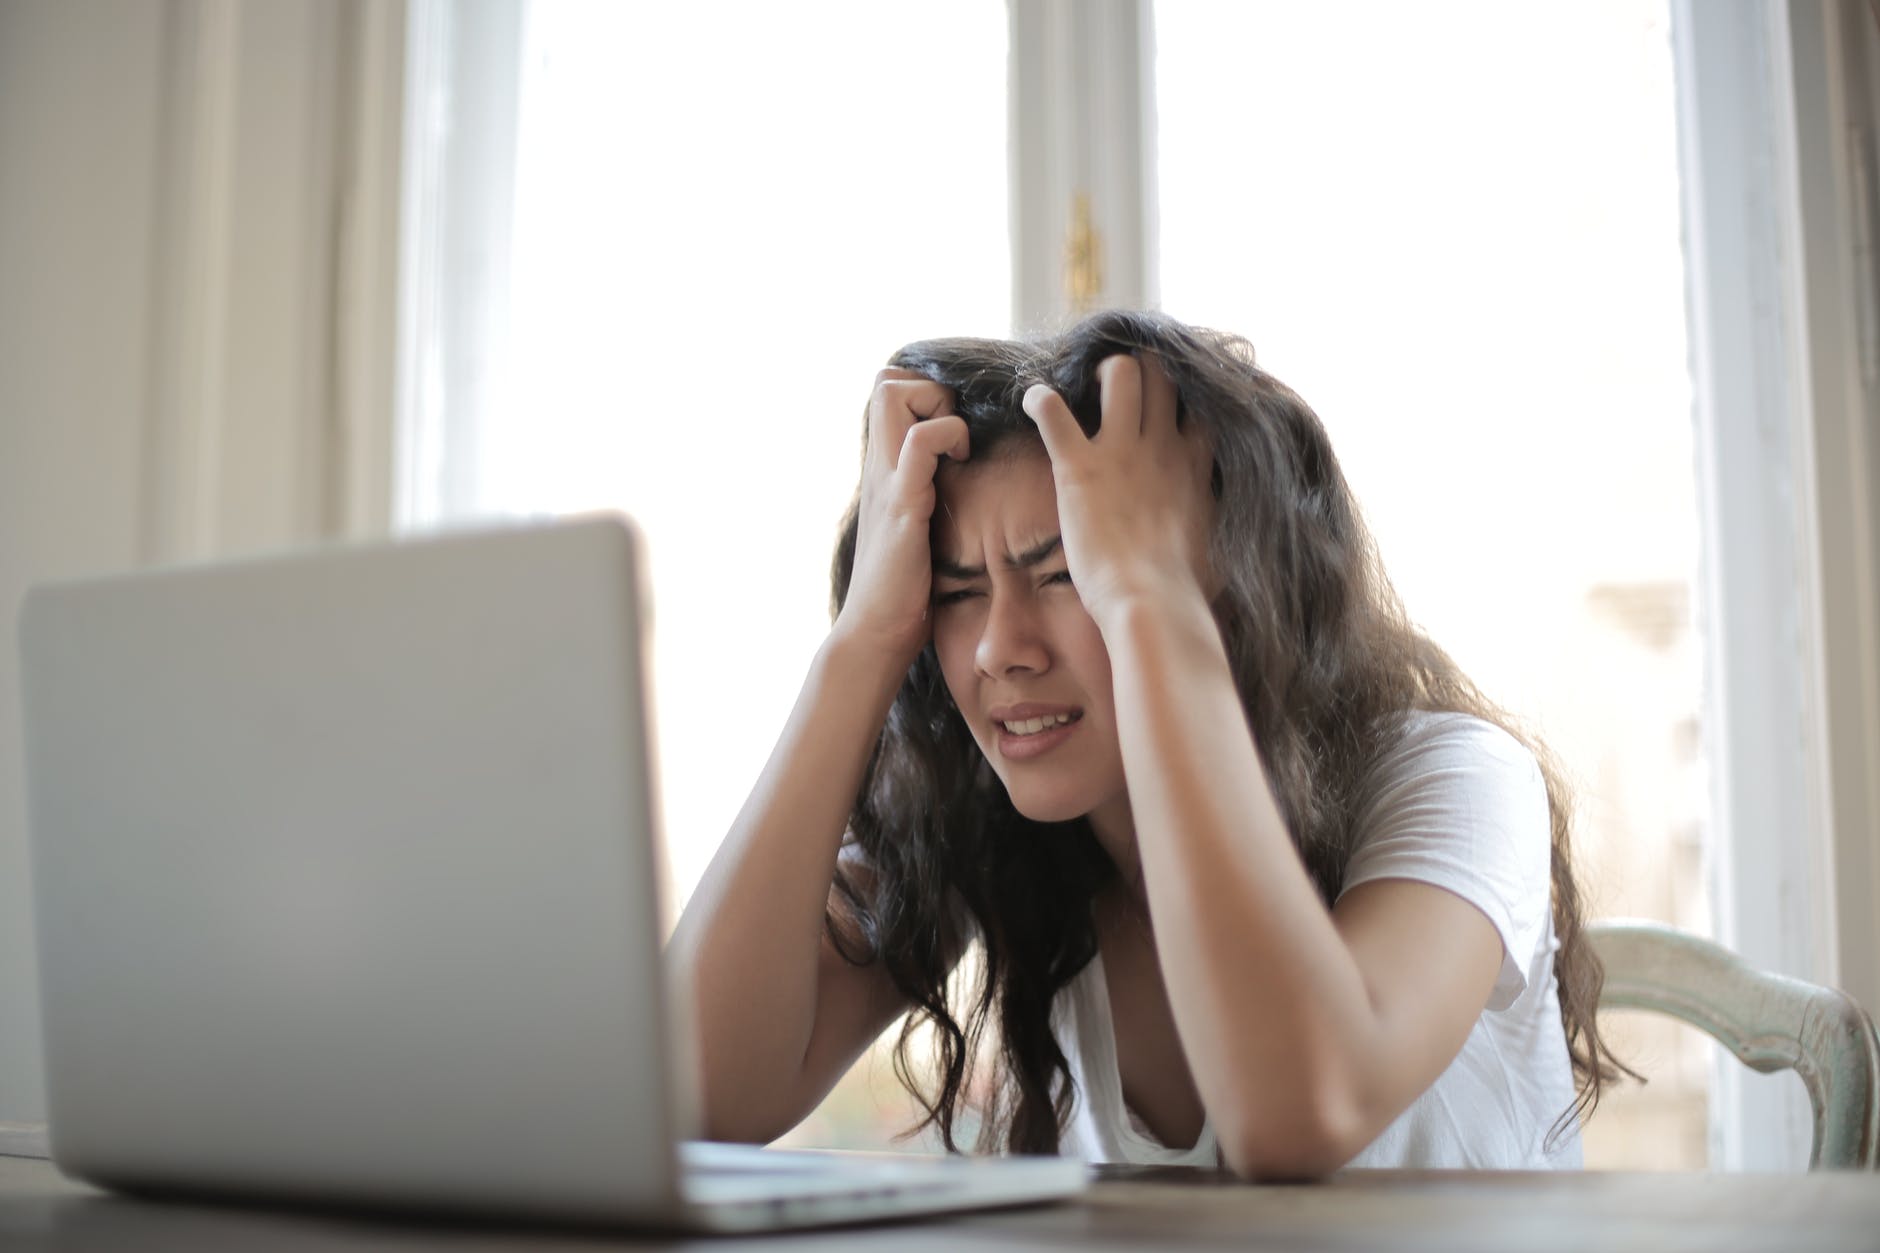 Stressed looking woman looking at her laptop with her head in her hands